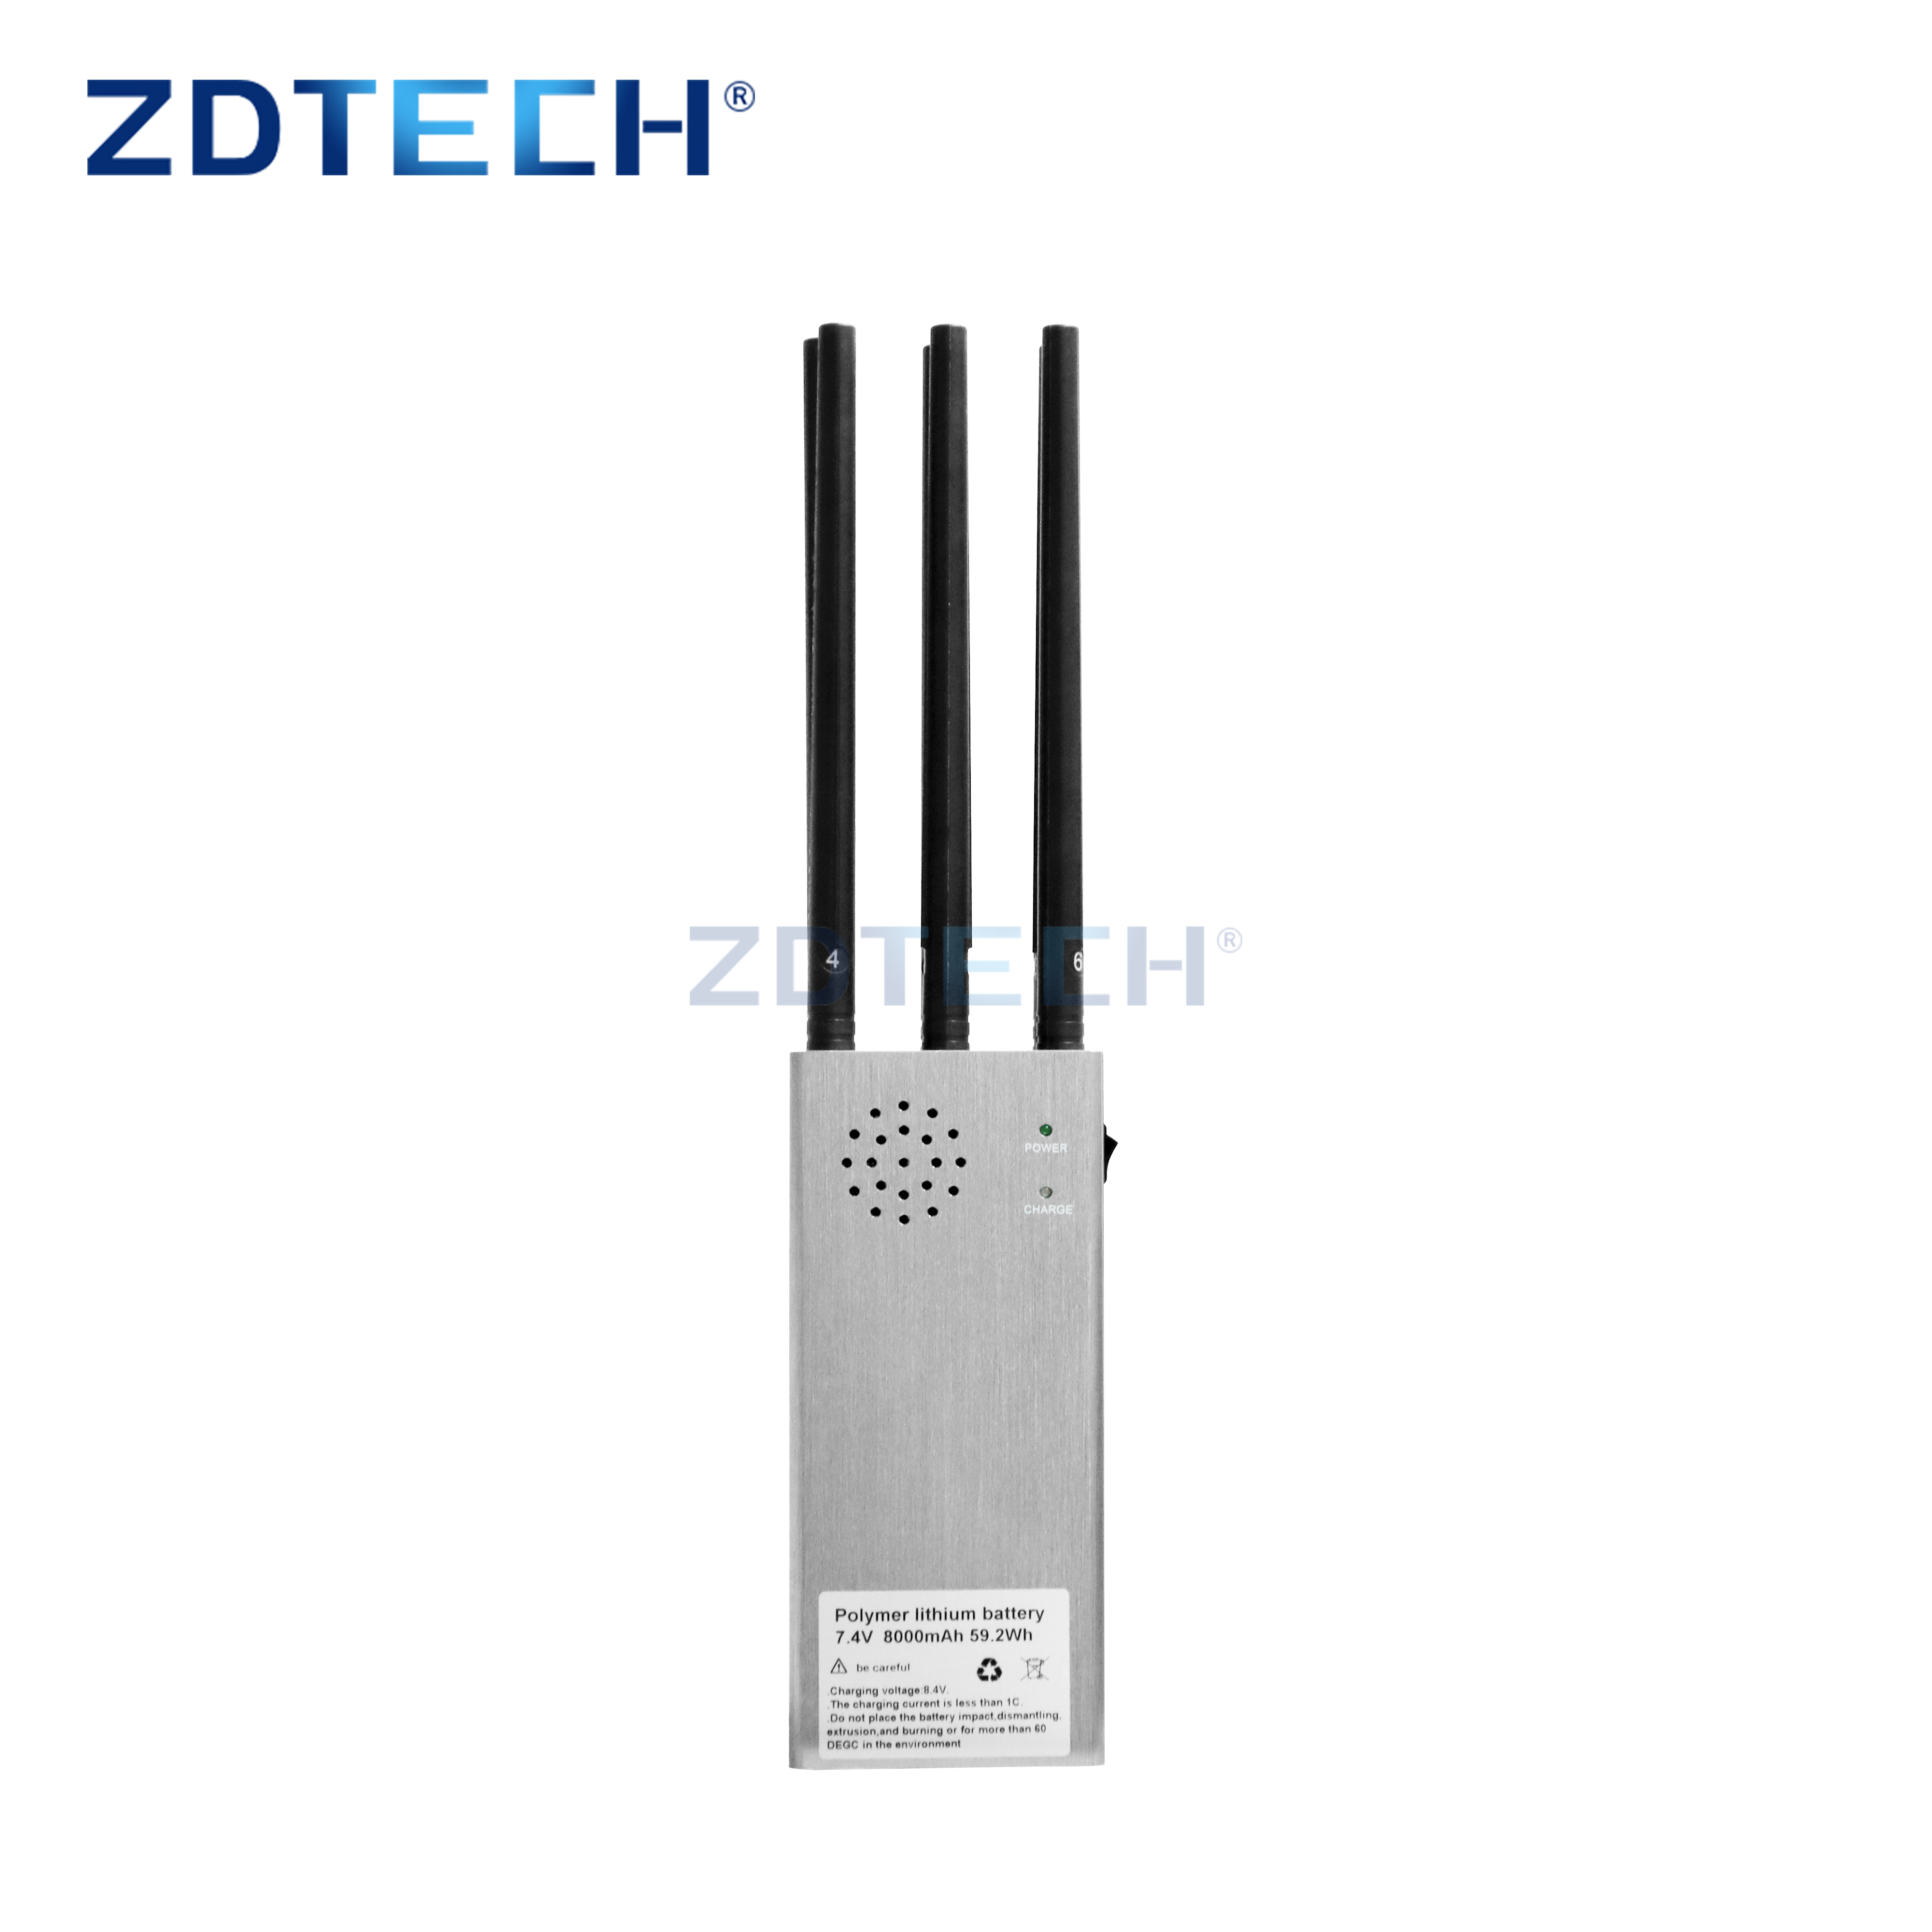 Portable Device Mobile Phone Signal Handheld Jammer with 6 Bands to Prevent Tracking